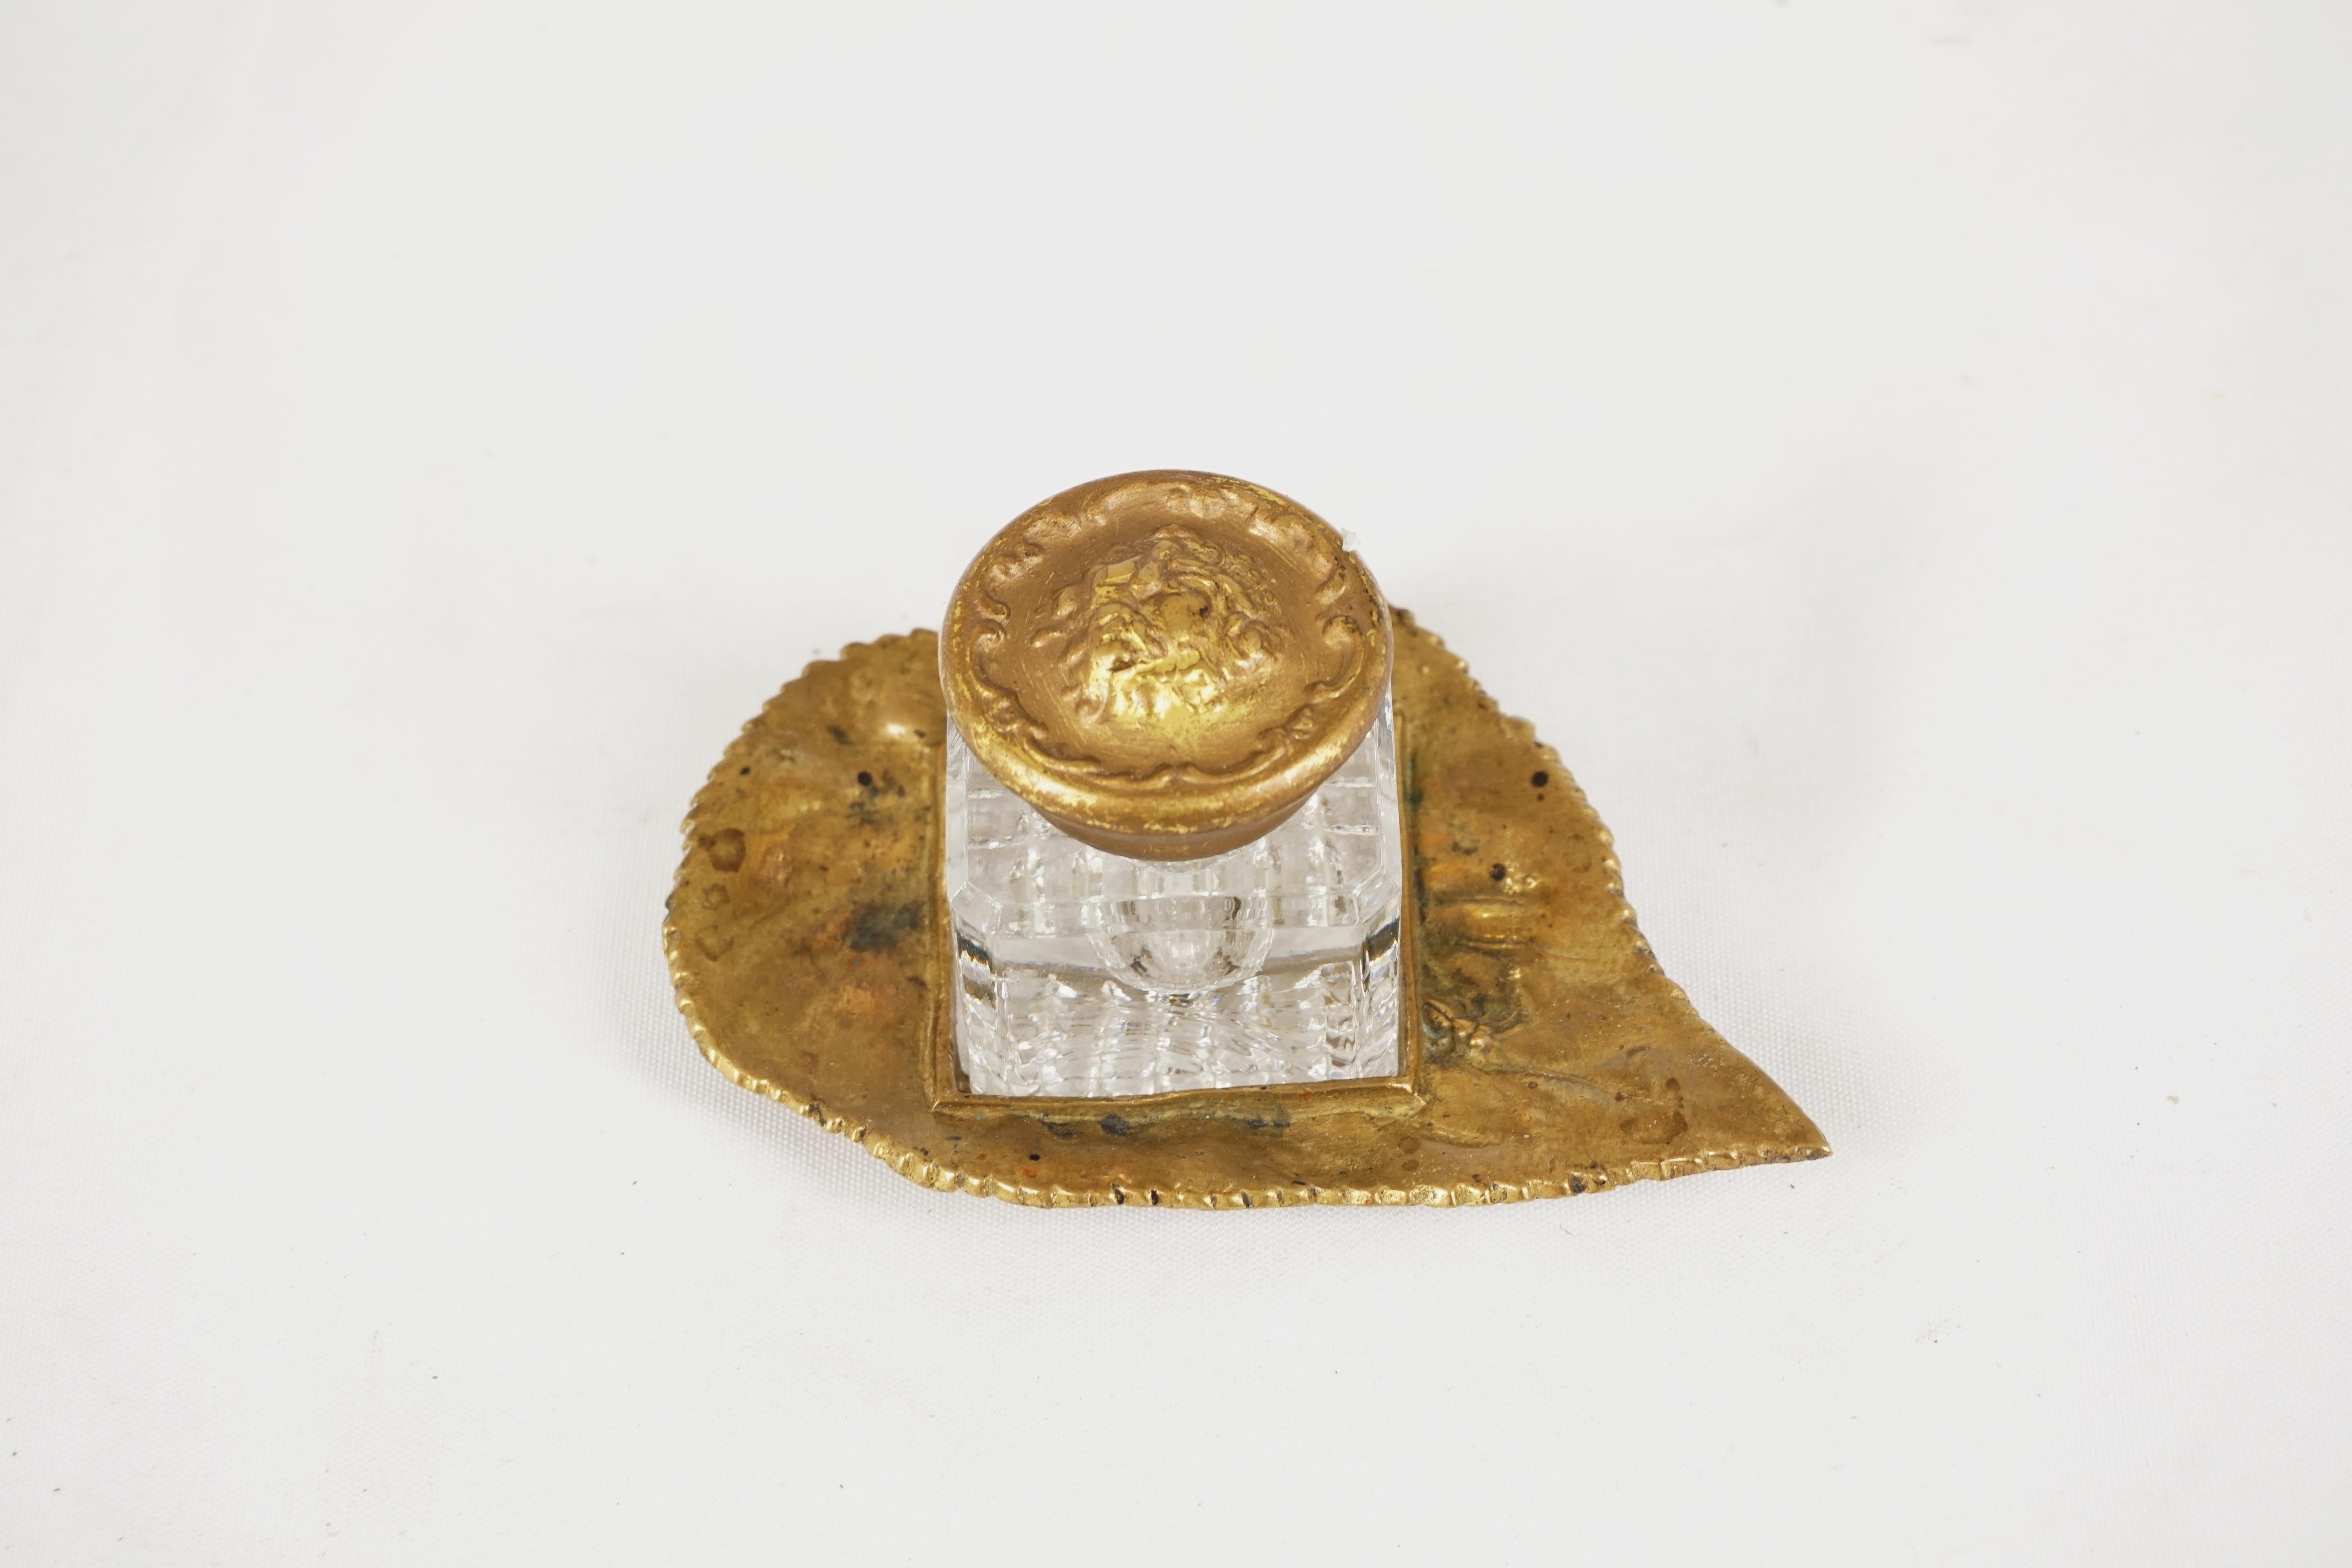 Antique Brass Inkstand, Leaf Form, Scotland 1910, H558

Scotland 1910
Brass + Glass
Embossed Lid
Cut Glass Inkwell Sitting In Brass Leaf 

H558

Measures: 4.5